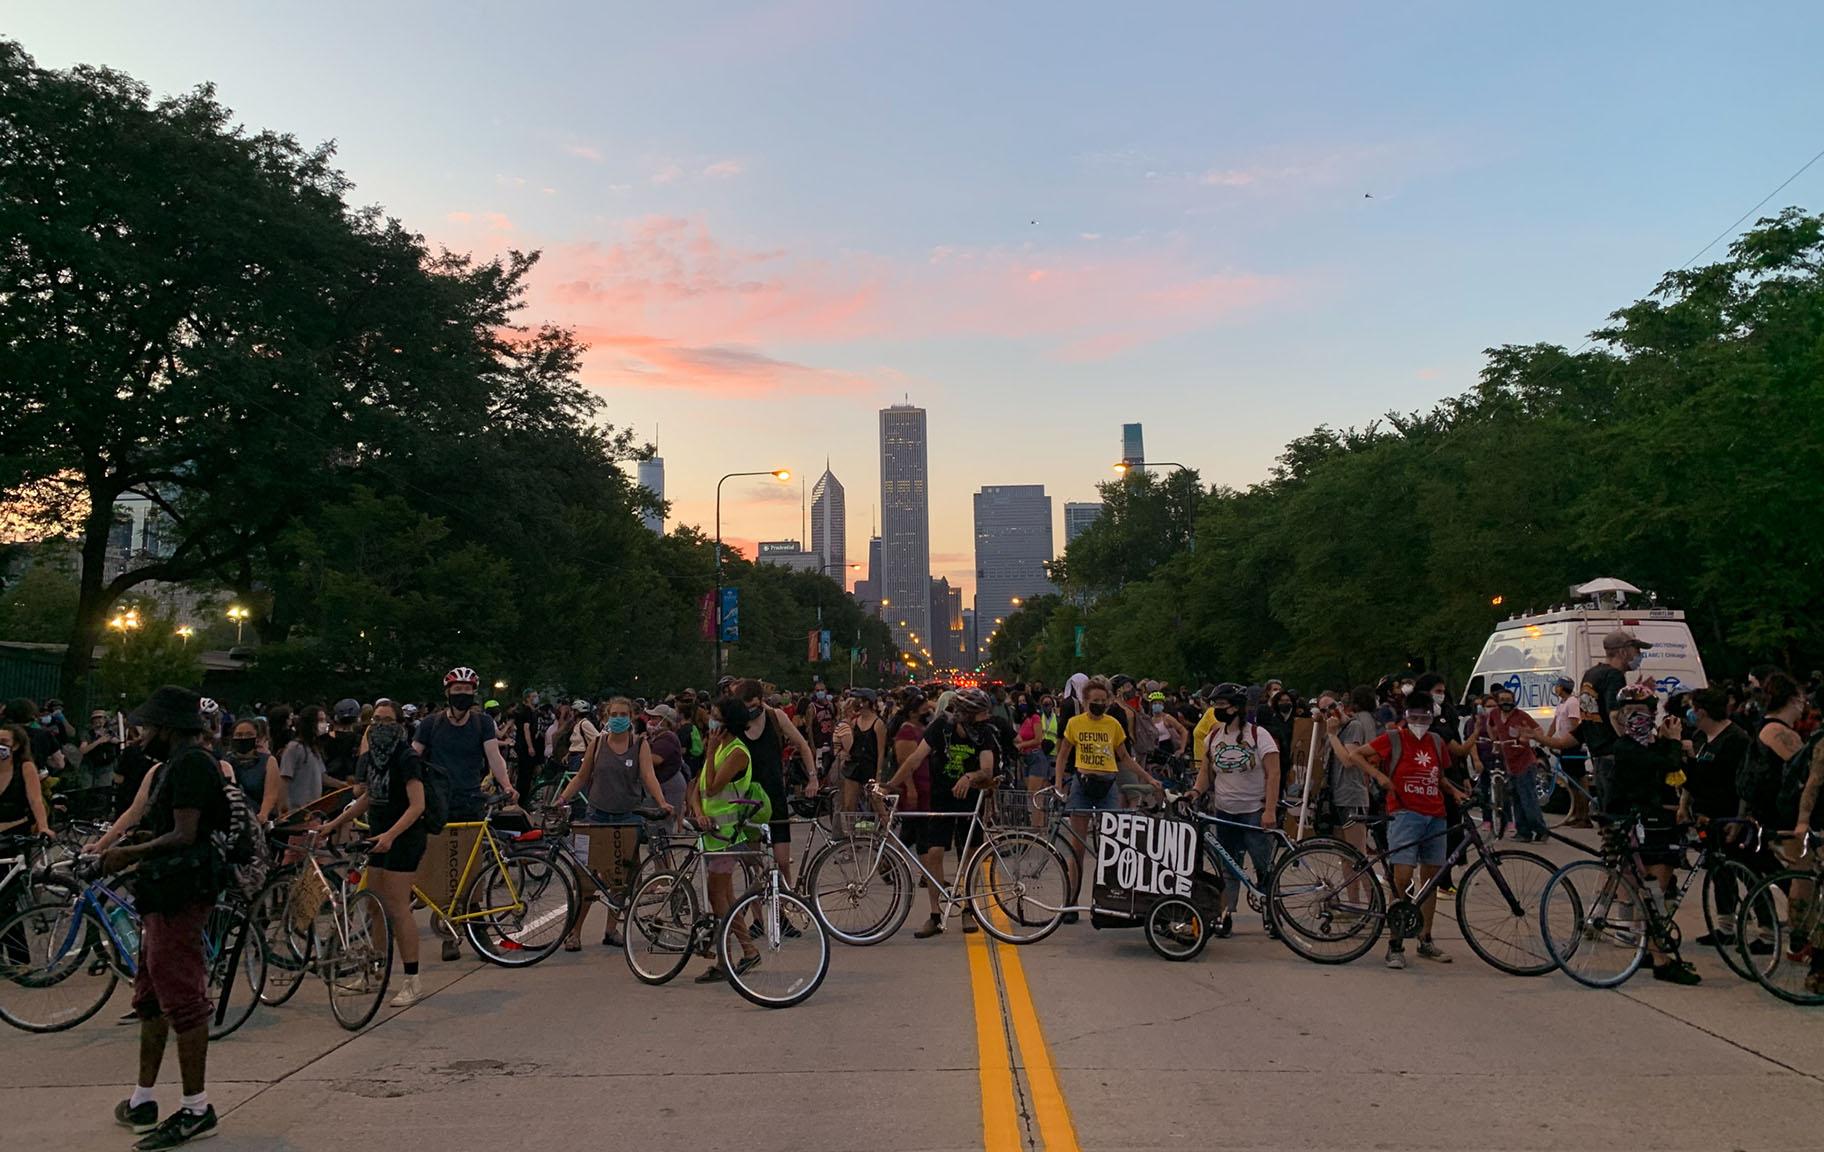 Protesters, many of them with bicycles, at a July 17 demonstration in Grant Park. (Grace Del Vecchio / WTTW News)